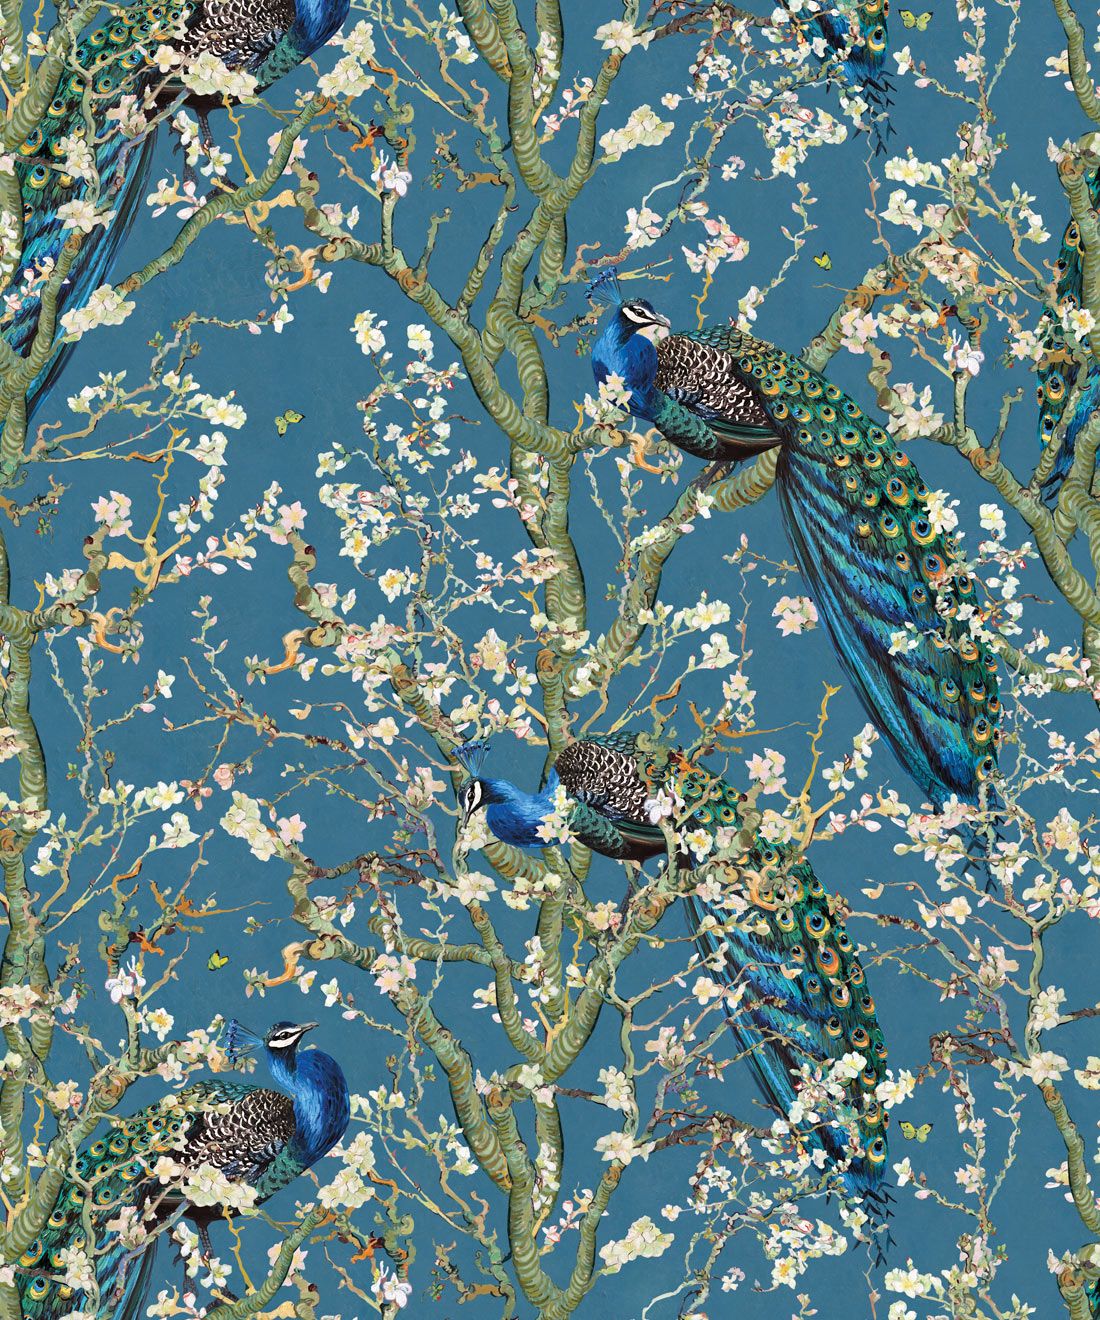 Almond Blossom Wallpaper • Chinoiserie Wallpaper • Wallpaper with Peacocks • Royal Blue Wallpaper • Swatch